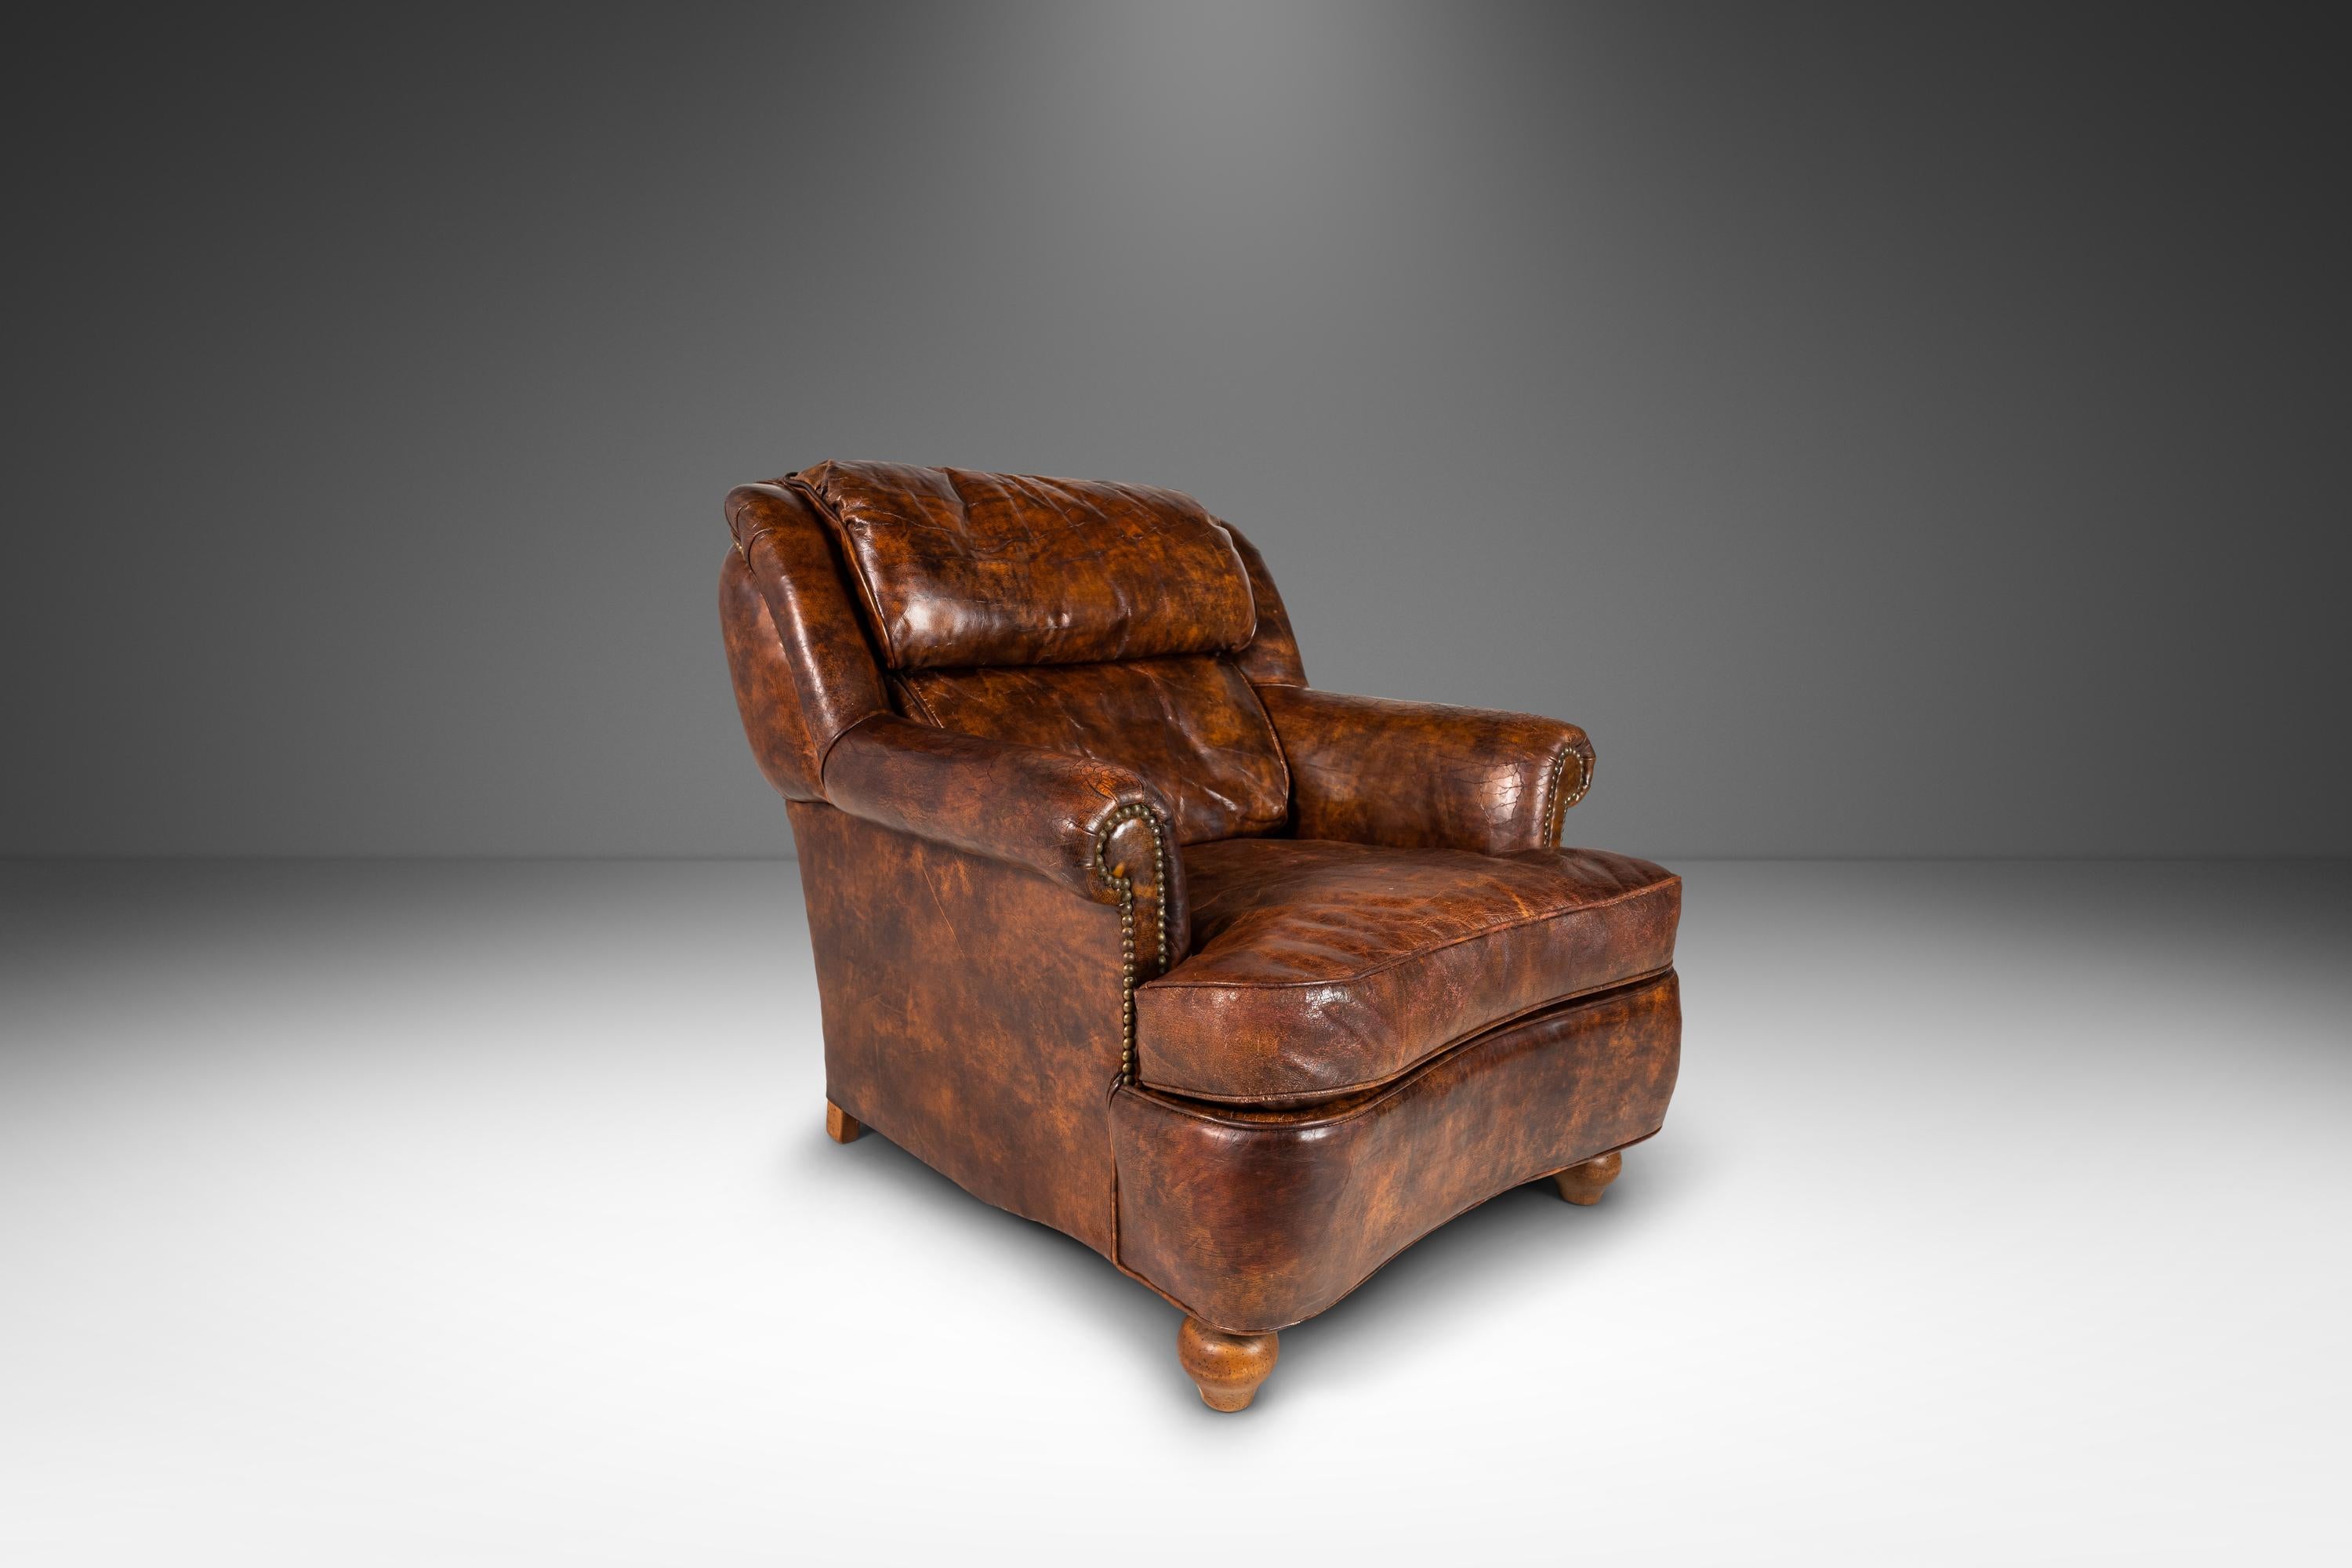 American Patinaed French Club Chair Cigar Chair & Ottoman in Distressed Leather c. 1940s For Sale